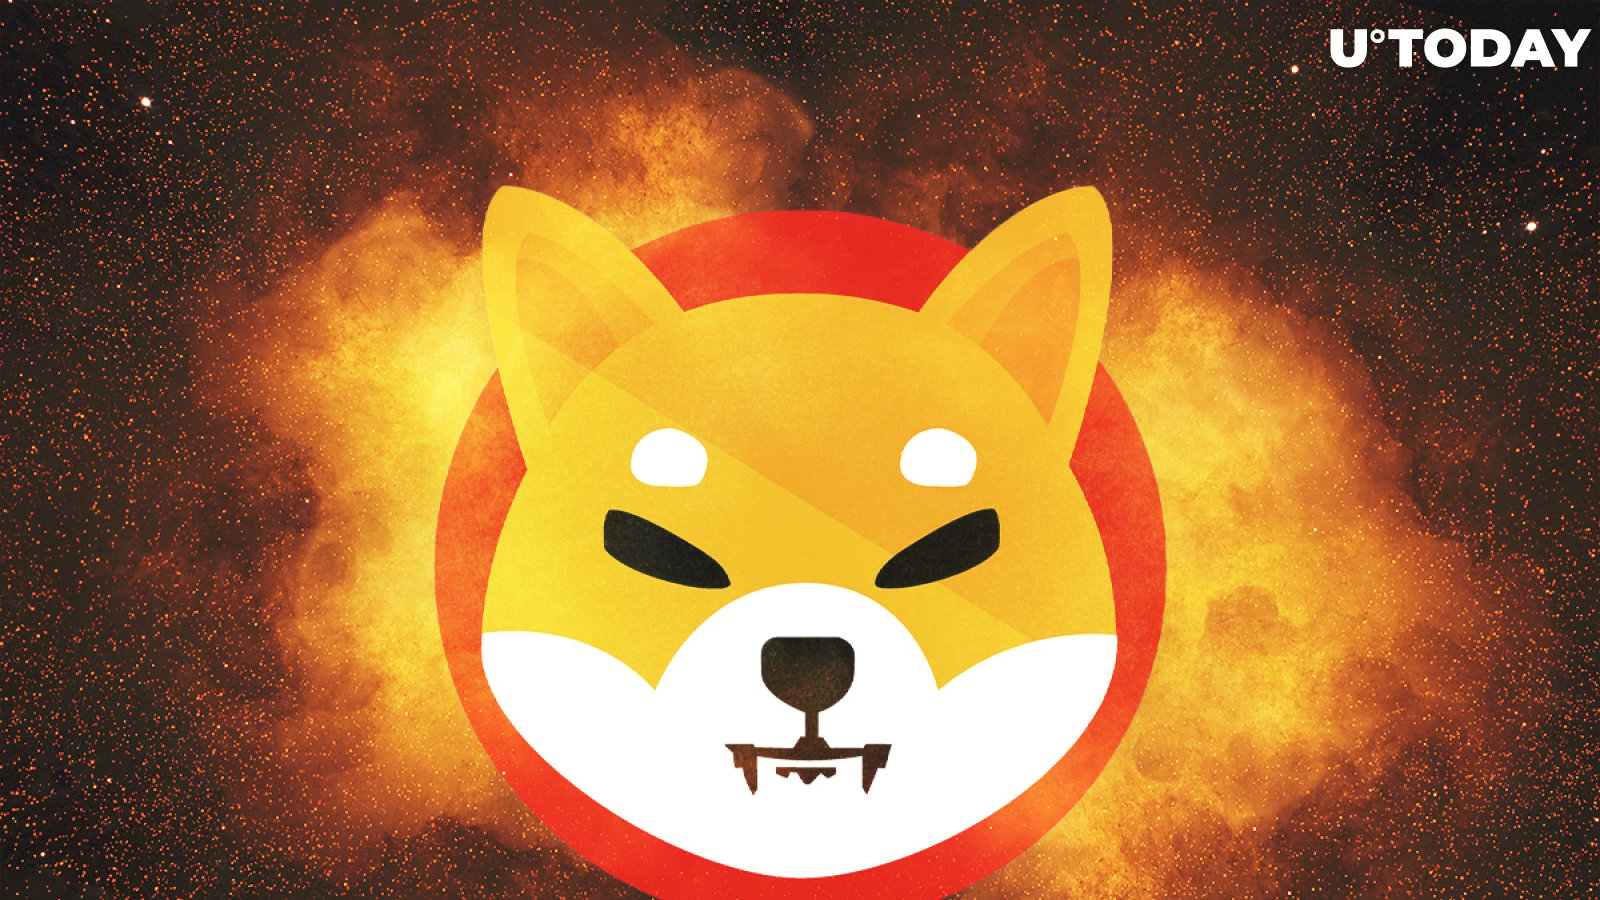 Almost 900 Million SHIB Tokens Burned Today